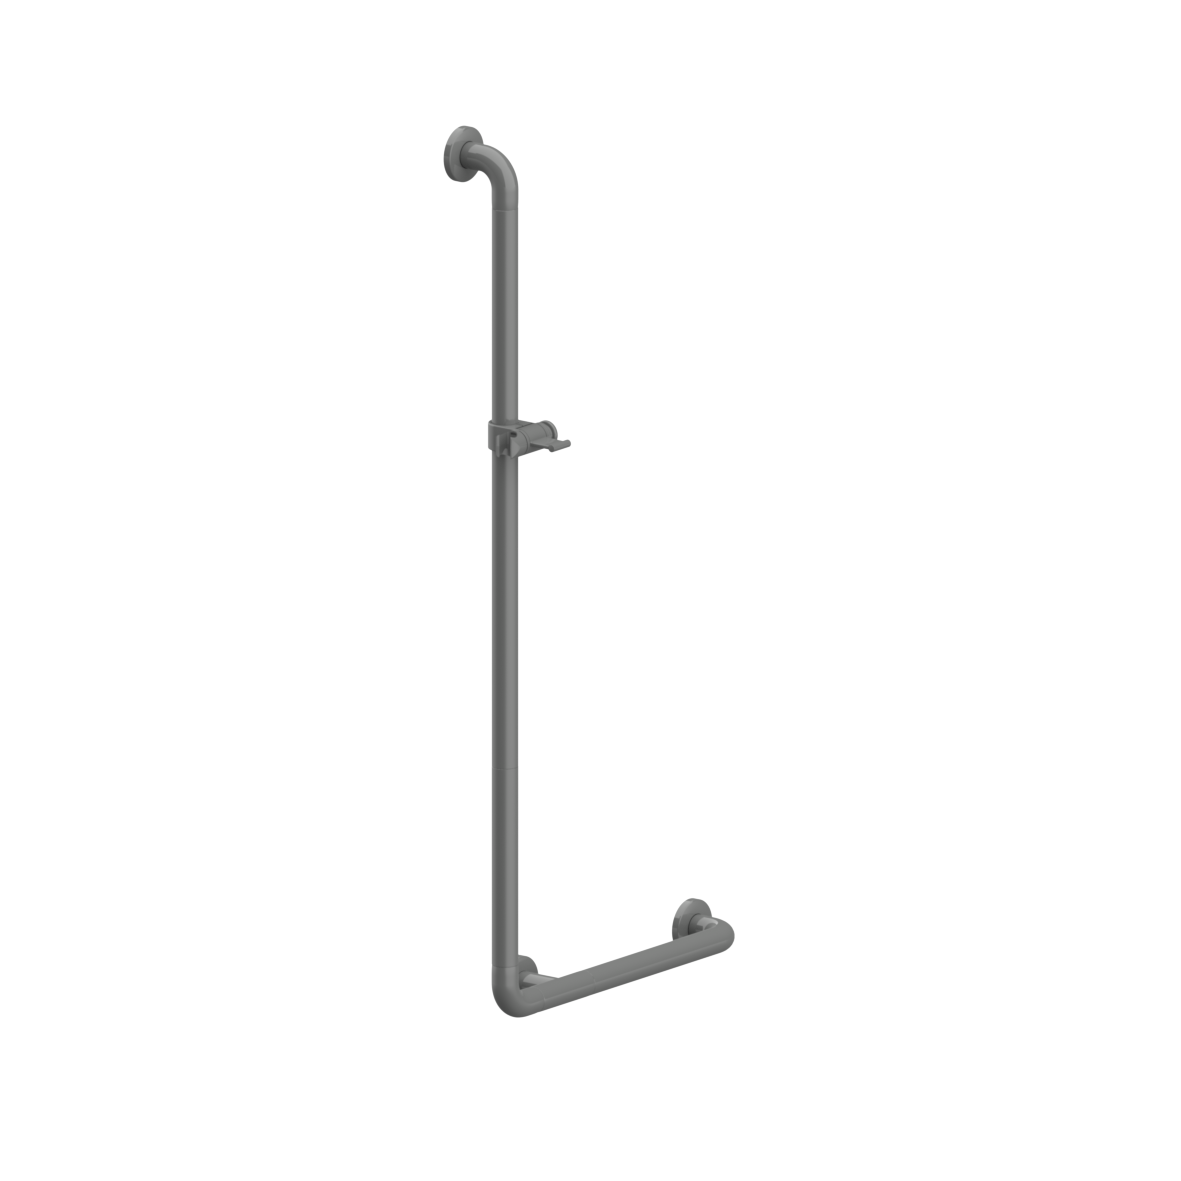 Special Care Adipositas Grab rail, with shower head holder, 90°, left and right, 460 x 1086 mm, Dark grey